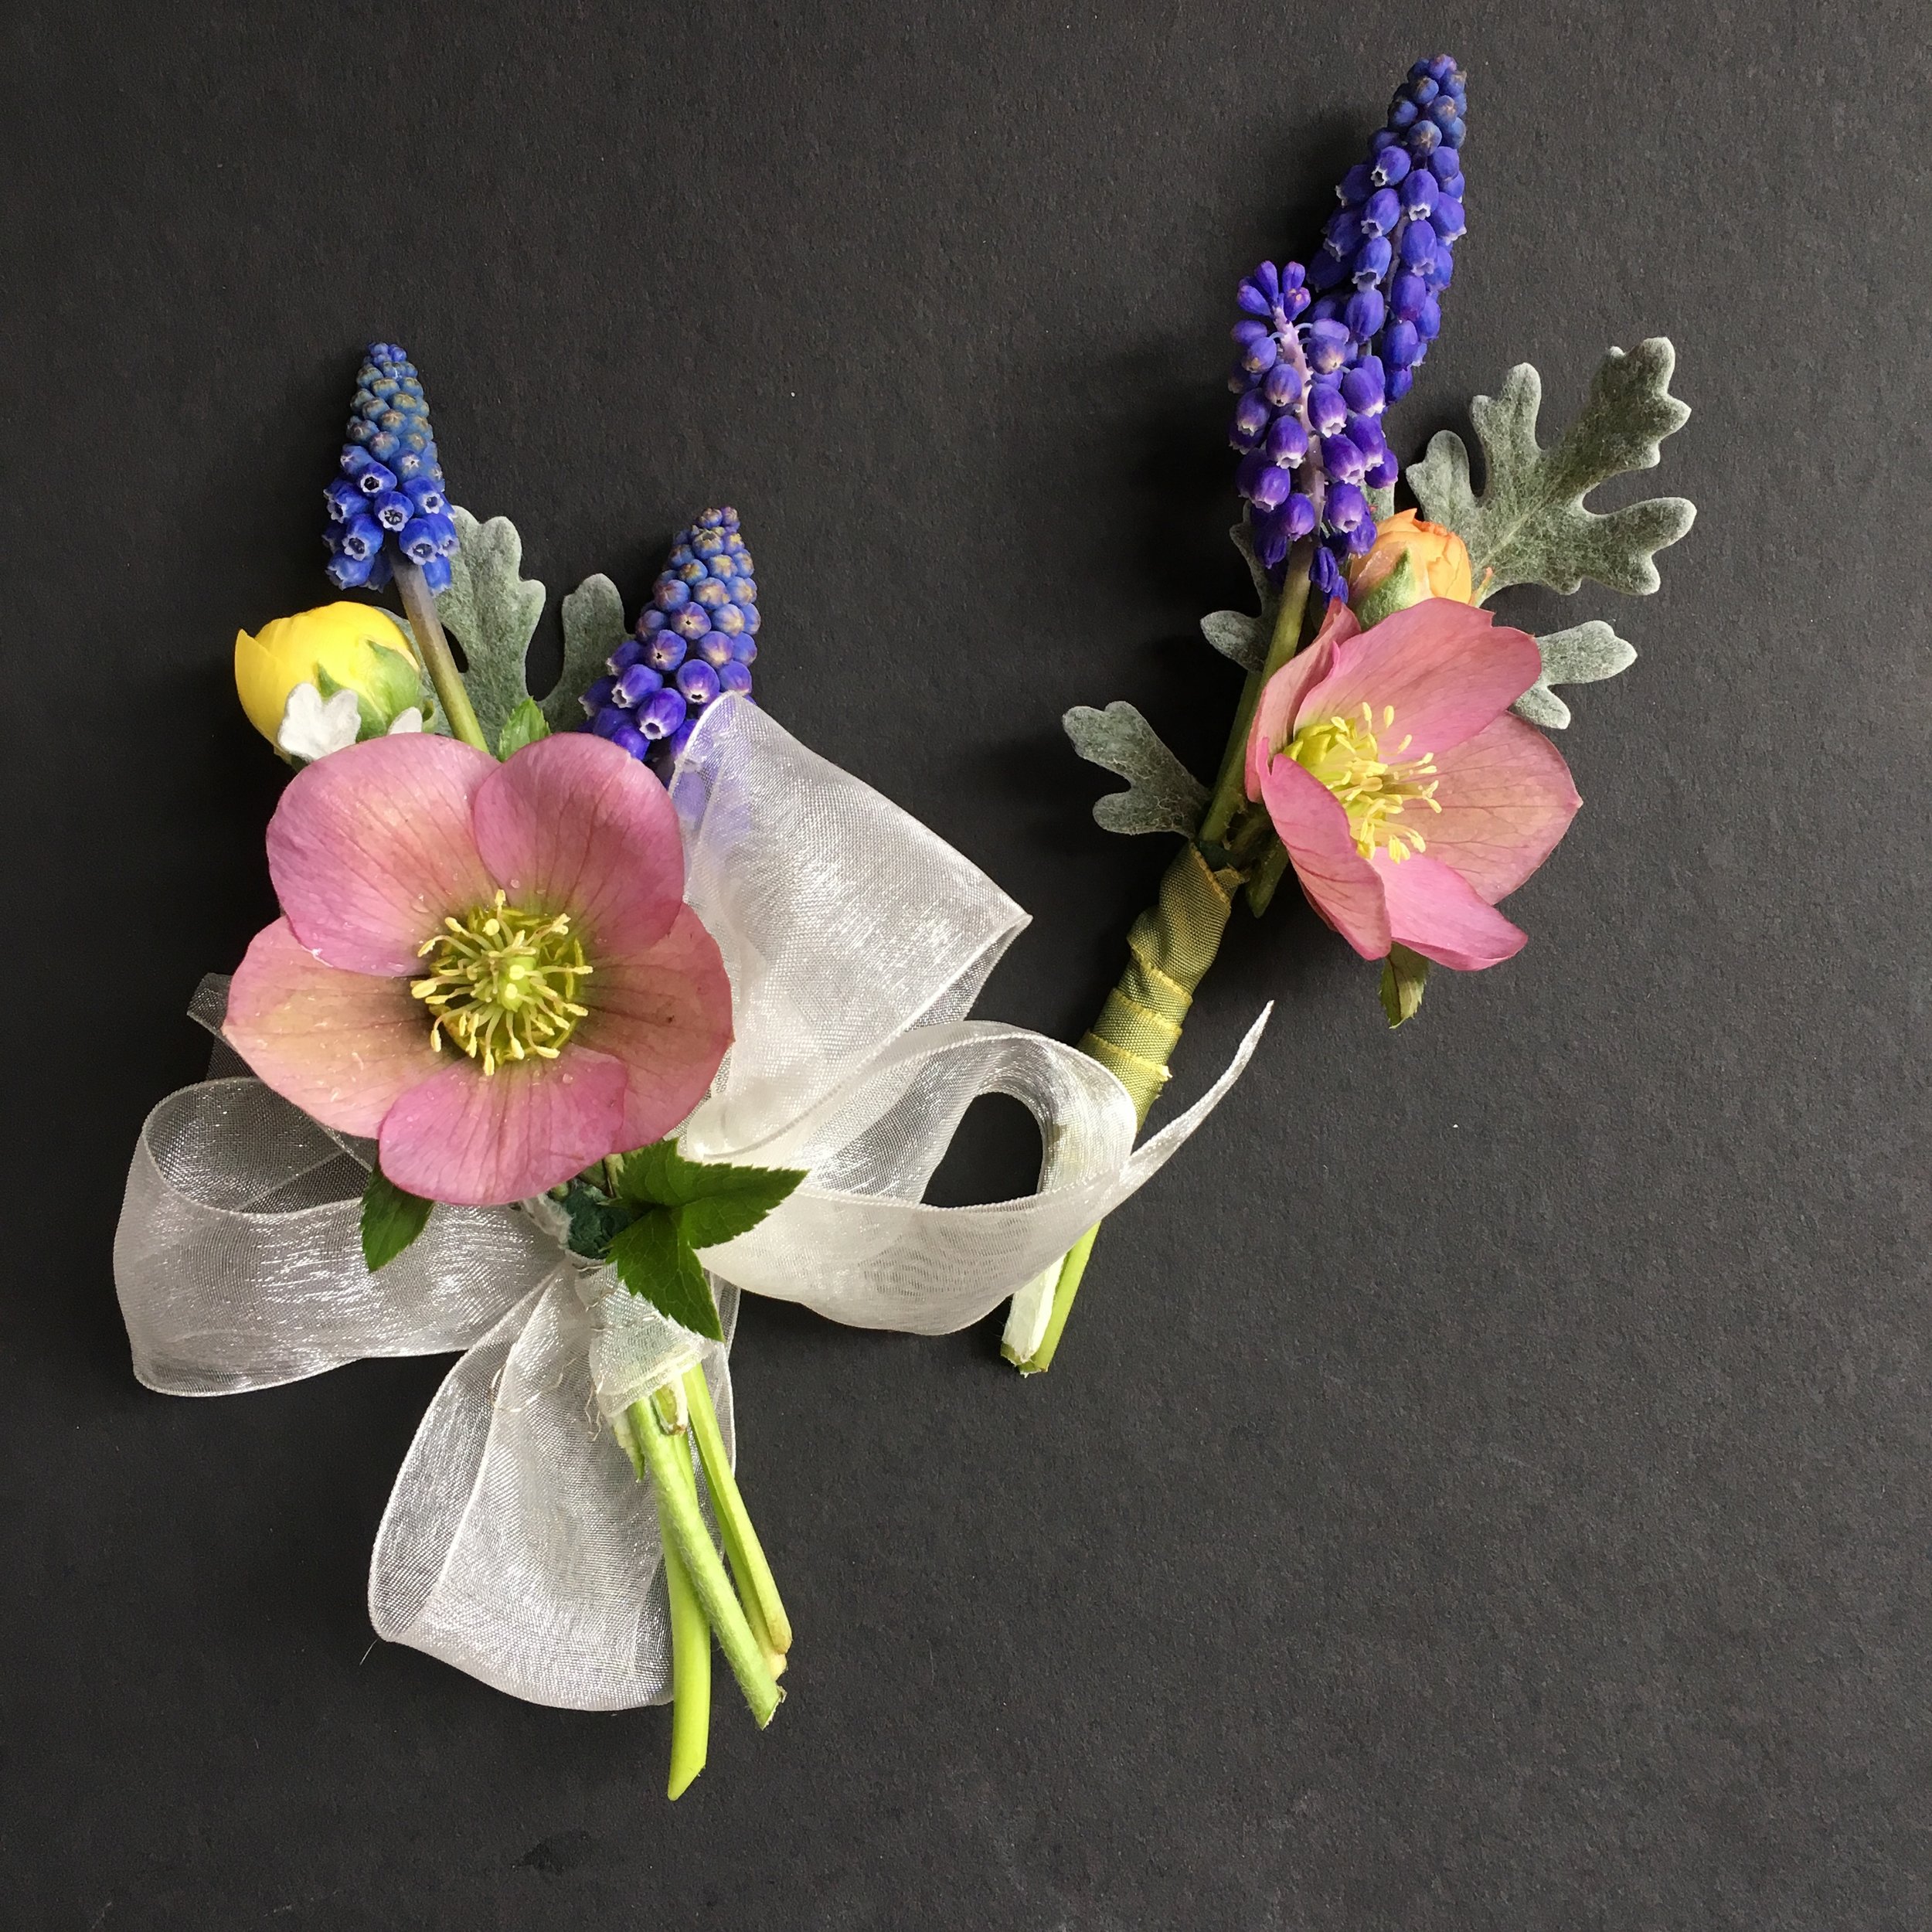 early spring boutonnière and corsage with hellebore, grape hyacinthe and ranunculus buds